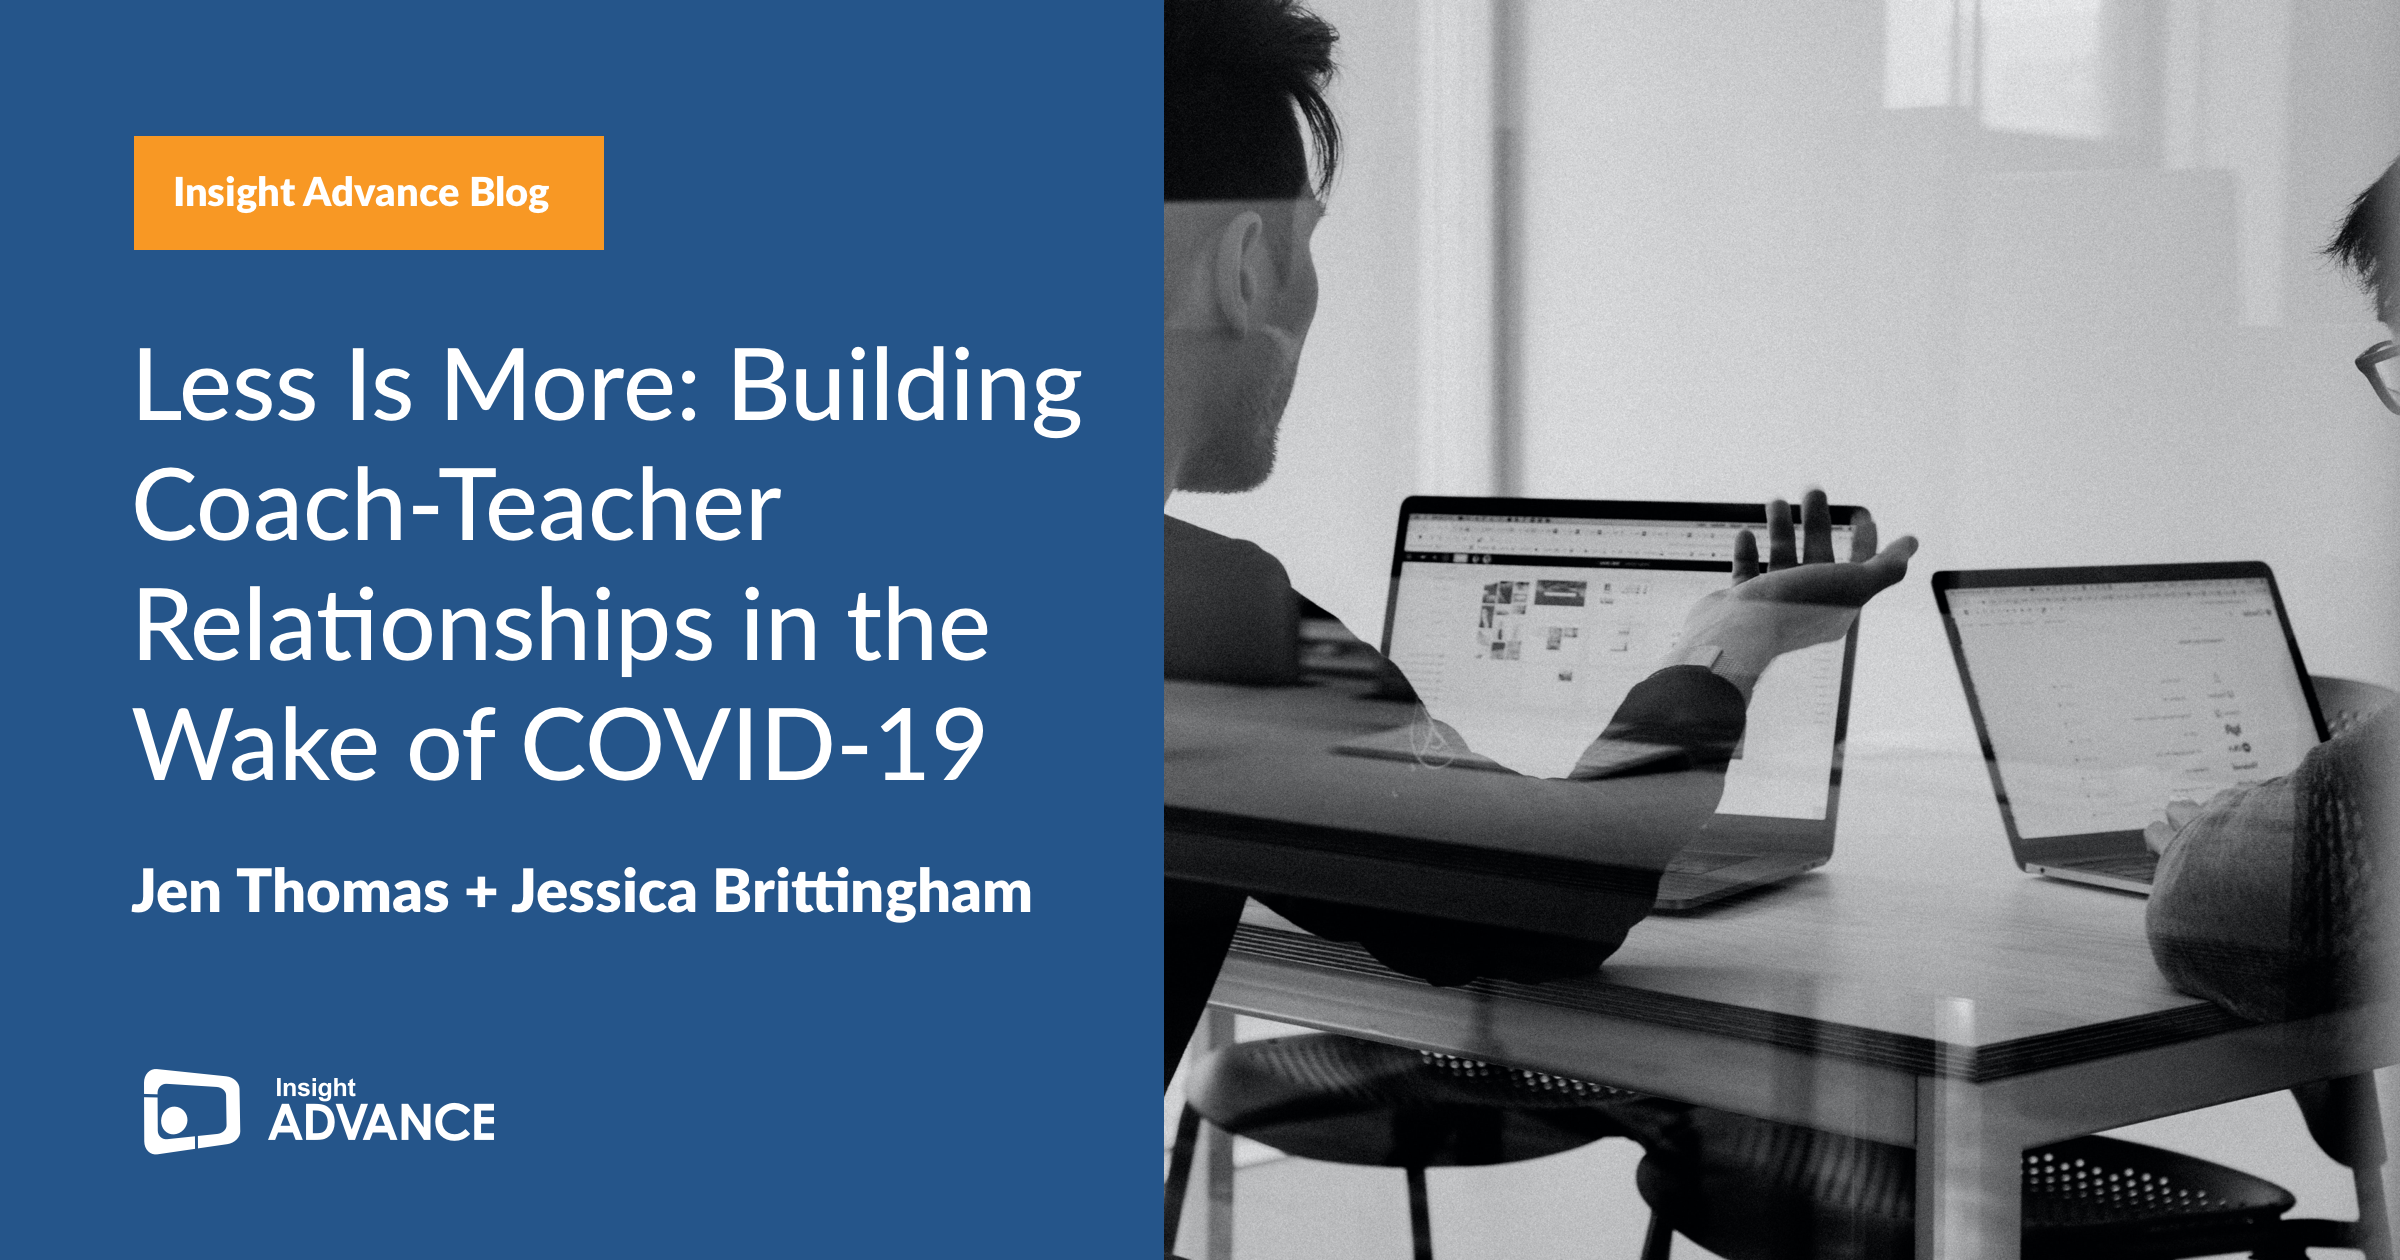 Less Is More: Building Coach-Teacher Relationships in the Wake of COVID-19